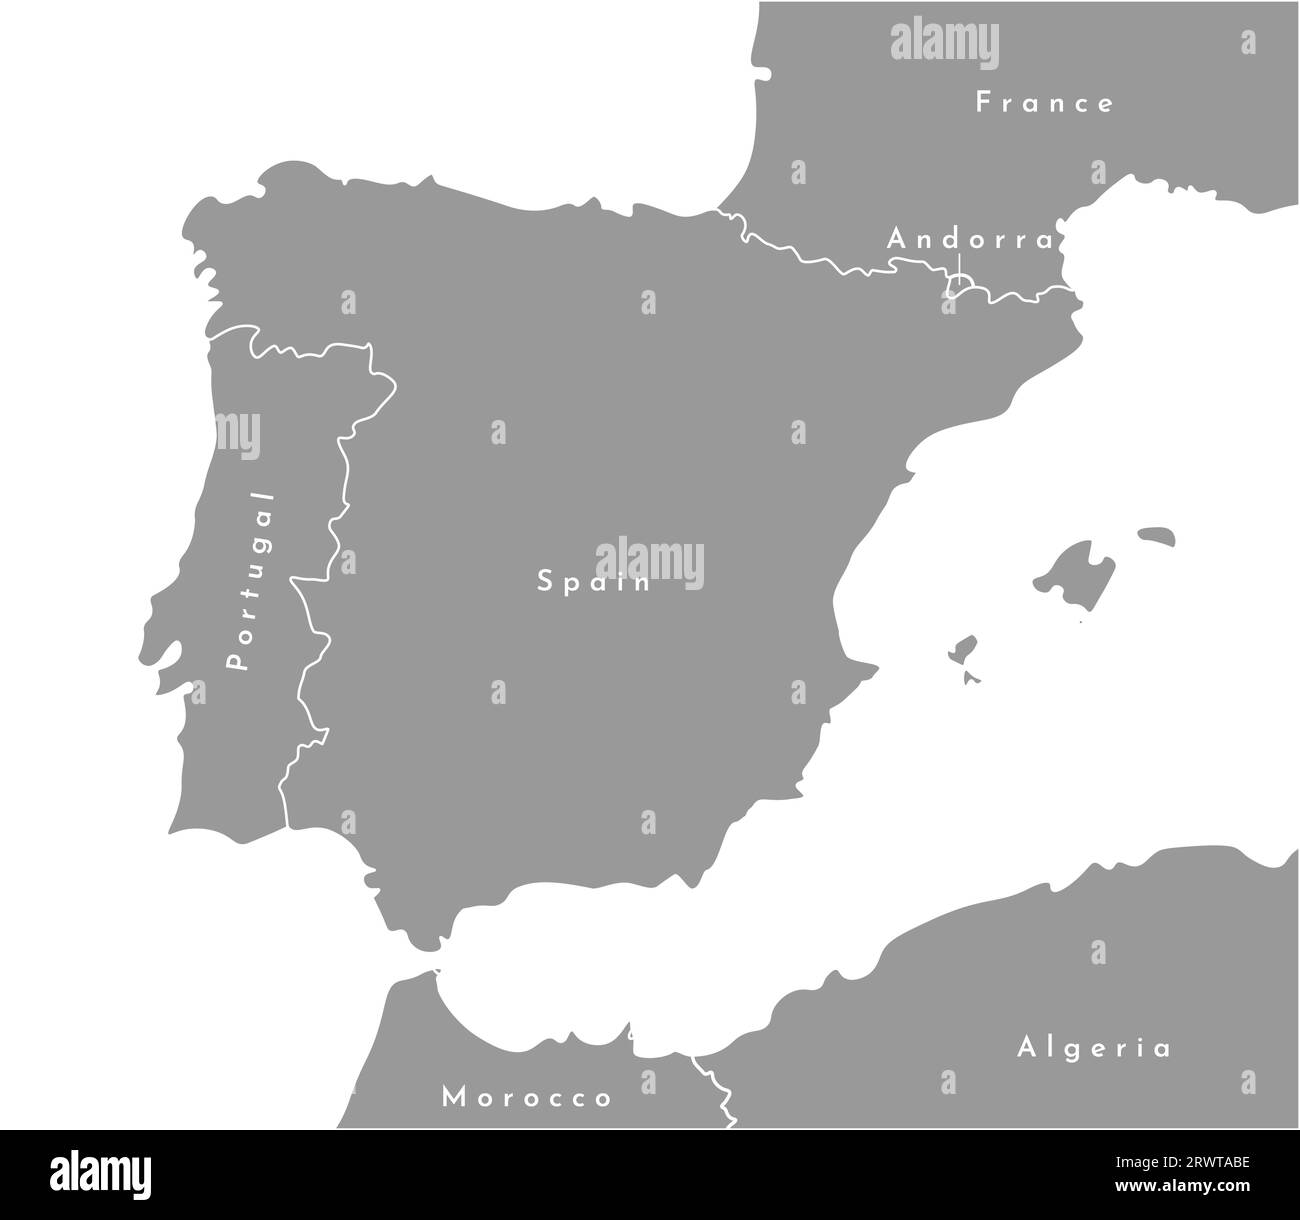 Vector modern illustration in grey color. Simplified european political map with Spain in the center. White background and outlines. Borders with Port Stock Vector